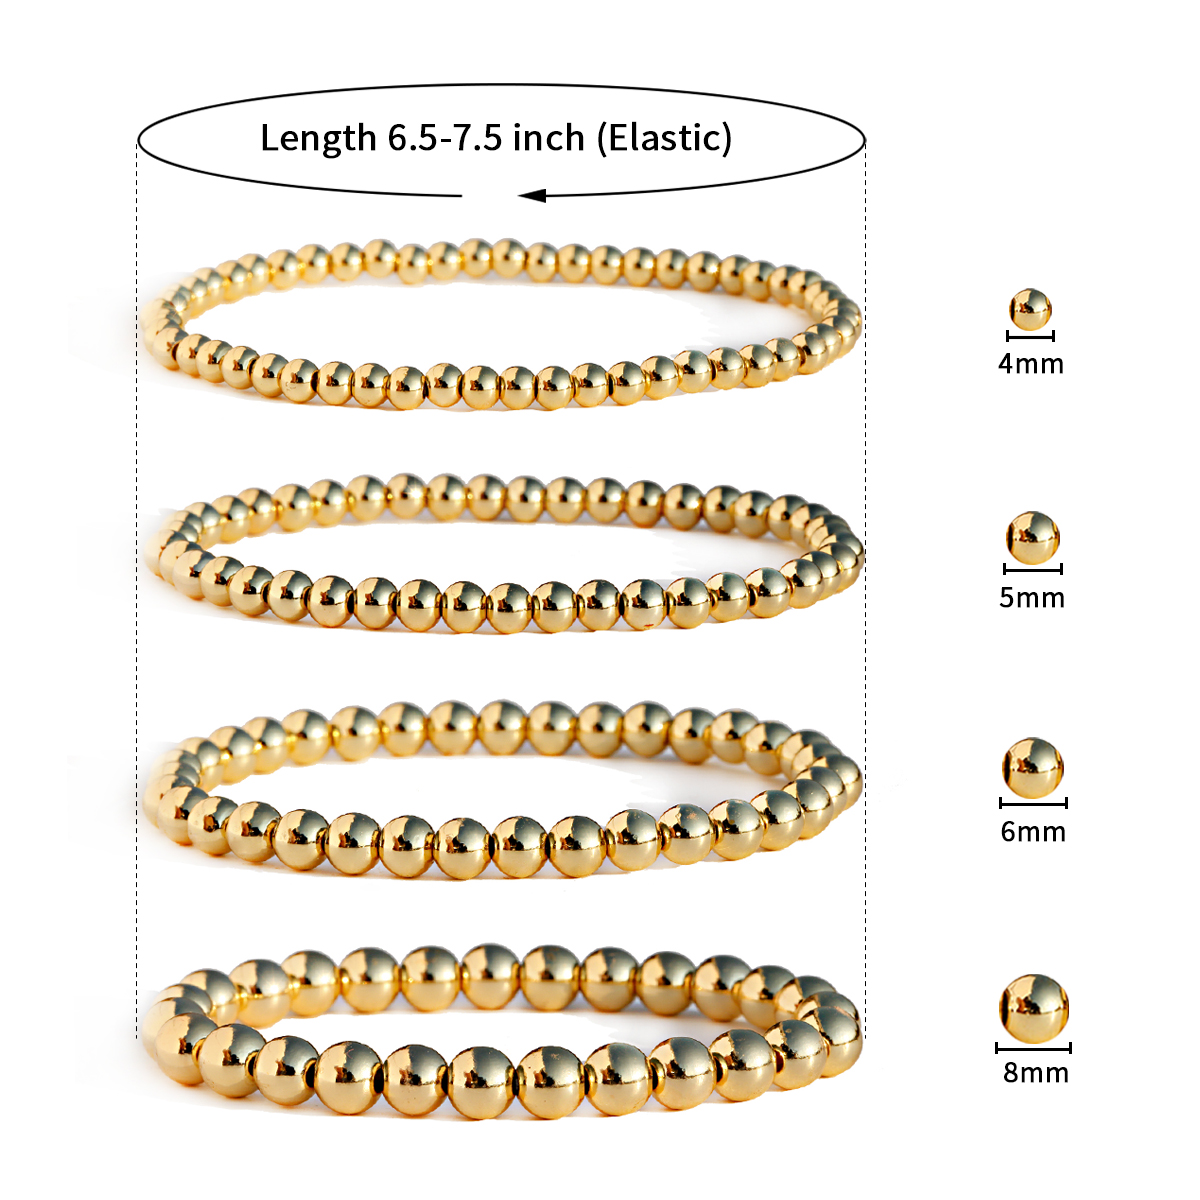 Stretchy Kindness Adult Bracelet (5mm Beads) 6.5 Inches / Gold Filled